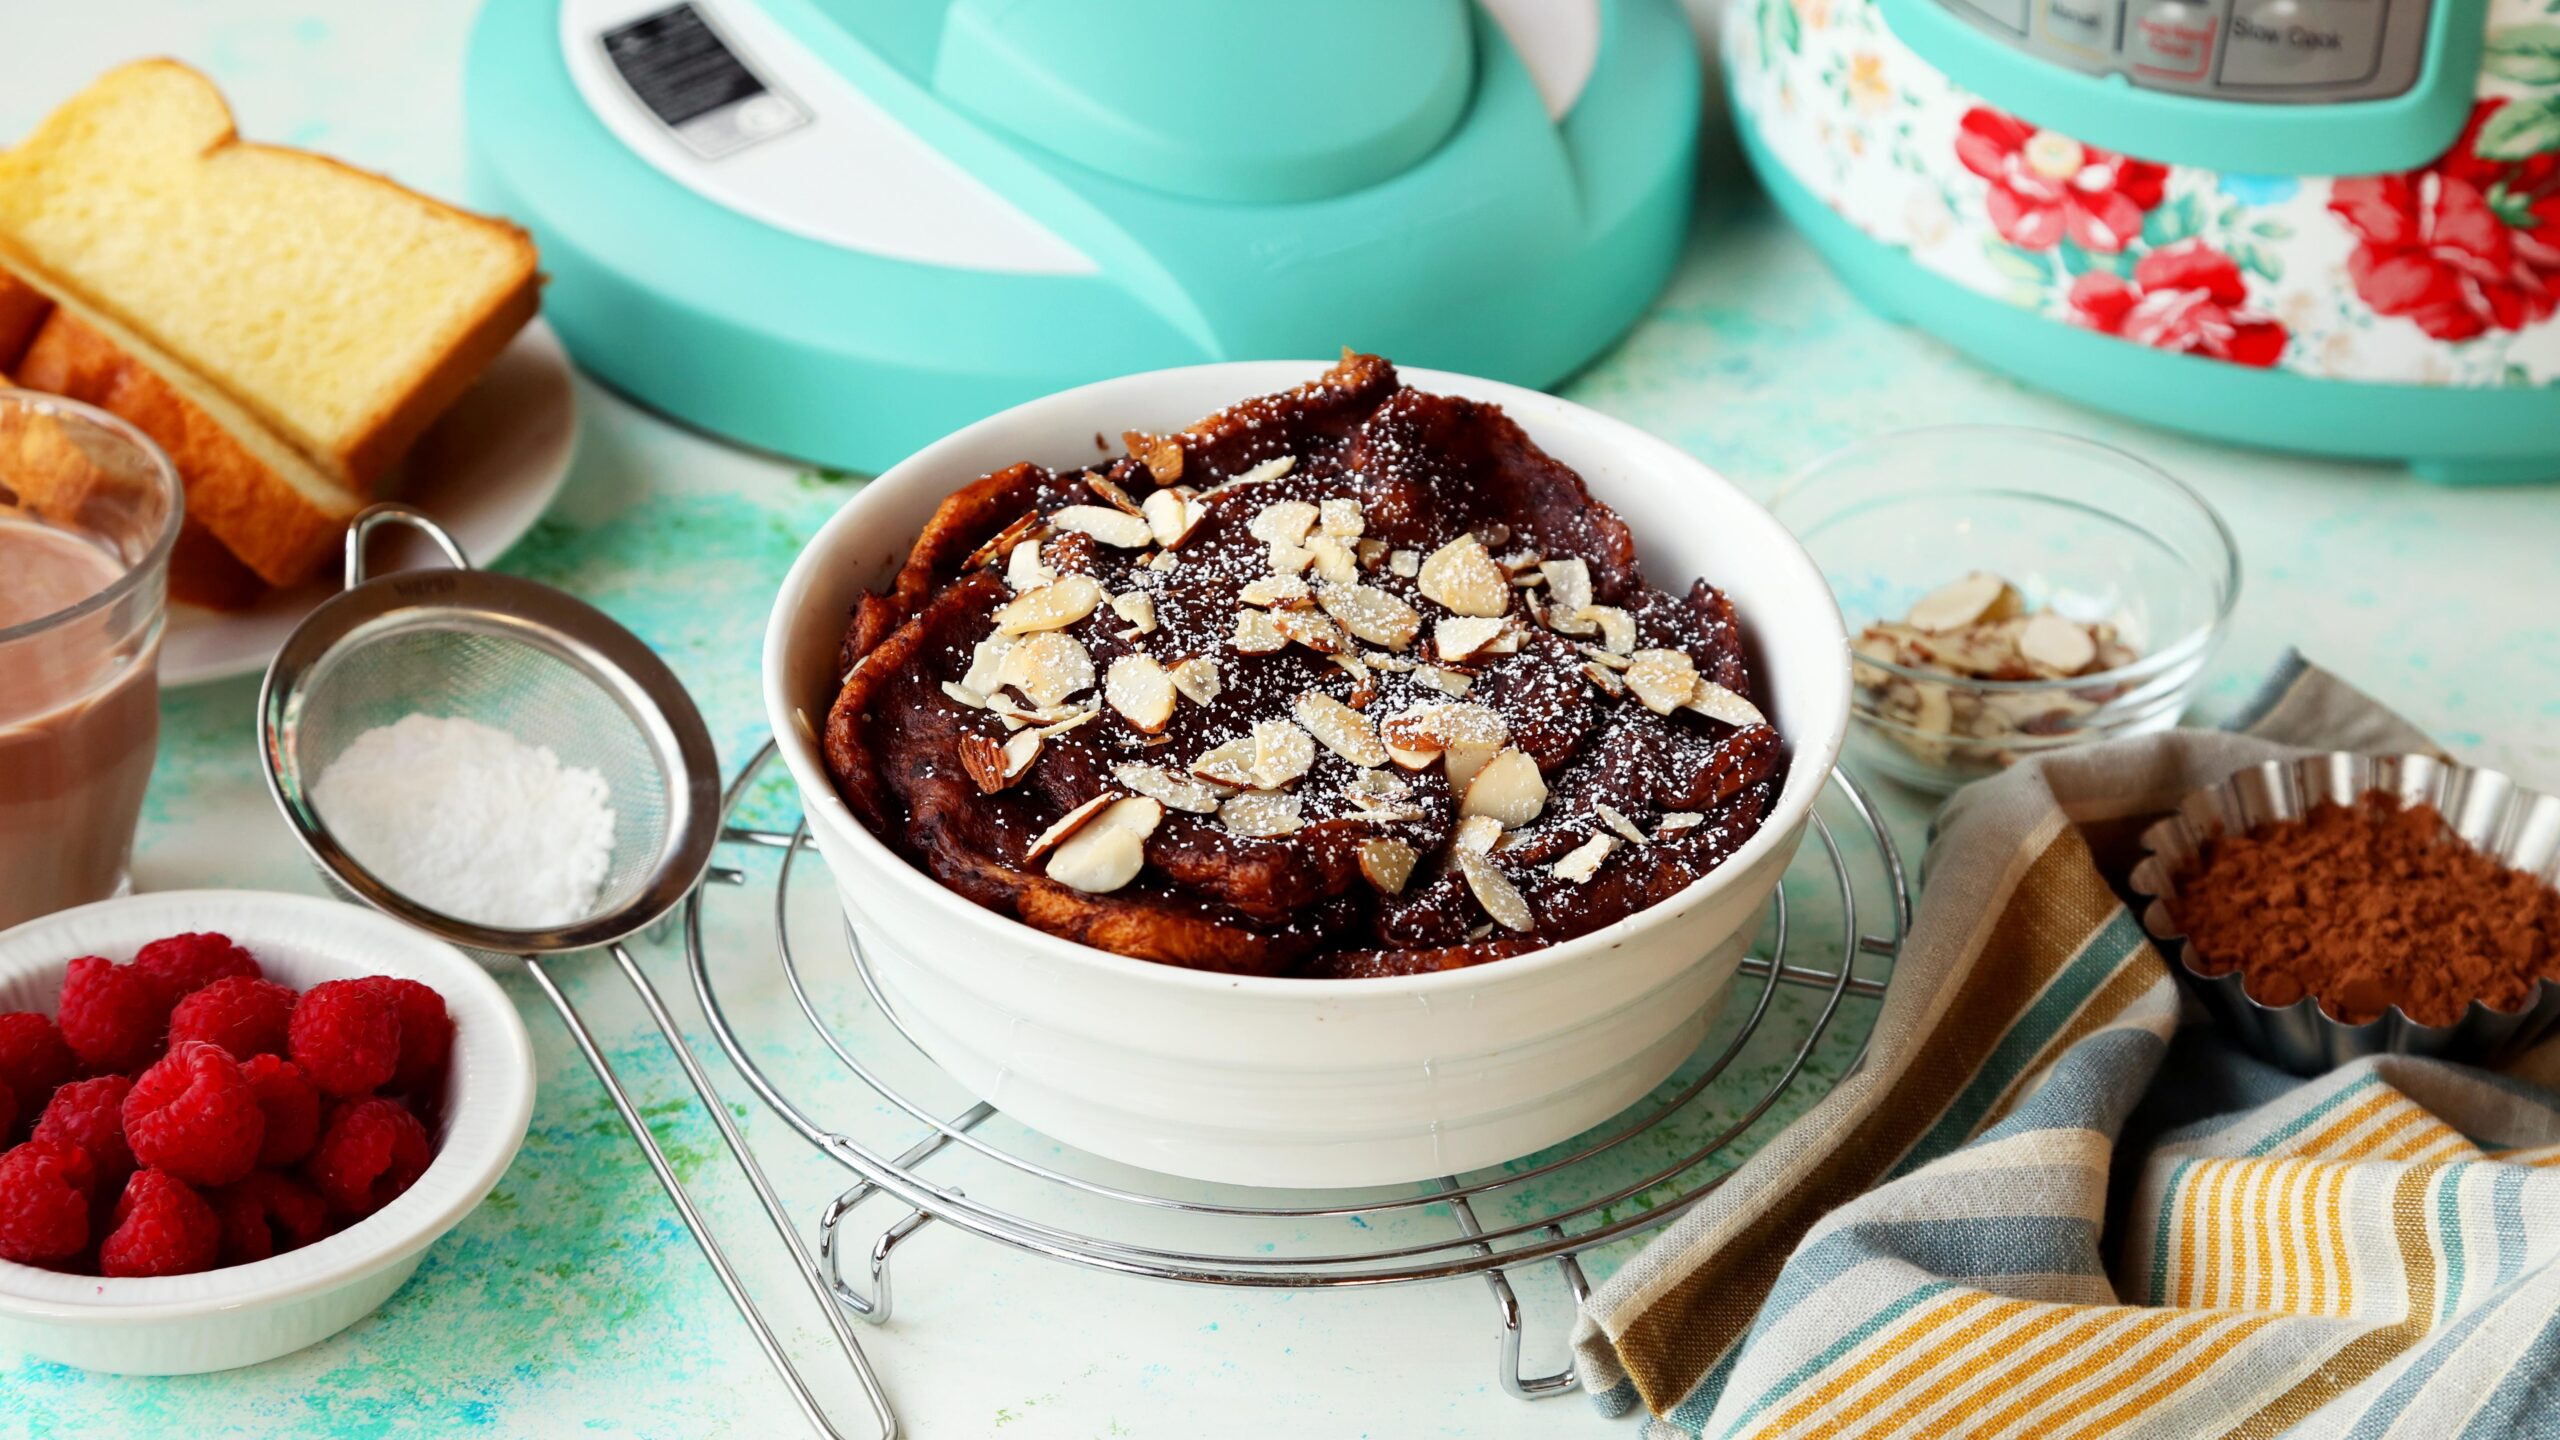  Chocolate + almond + French toast = heavenly combination in this easy breakfast recipe.